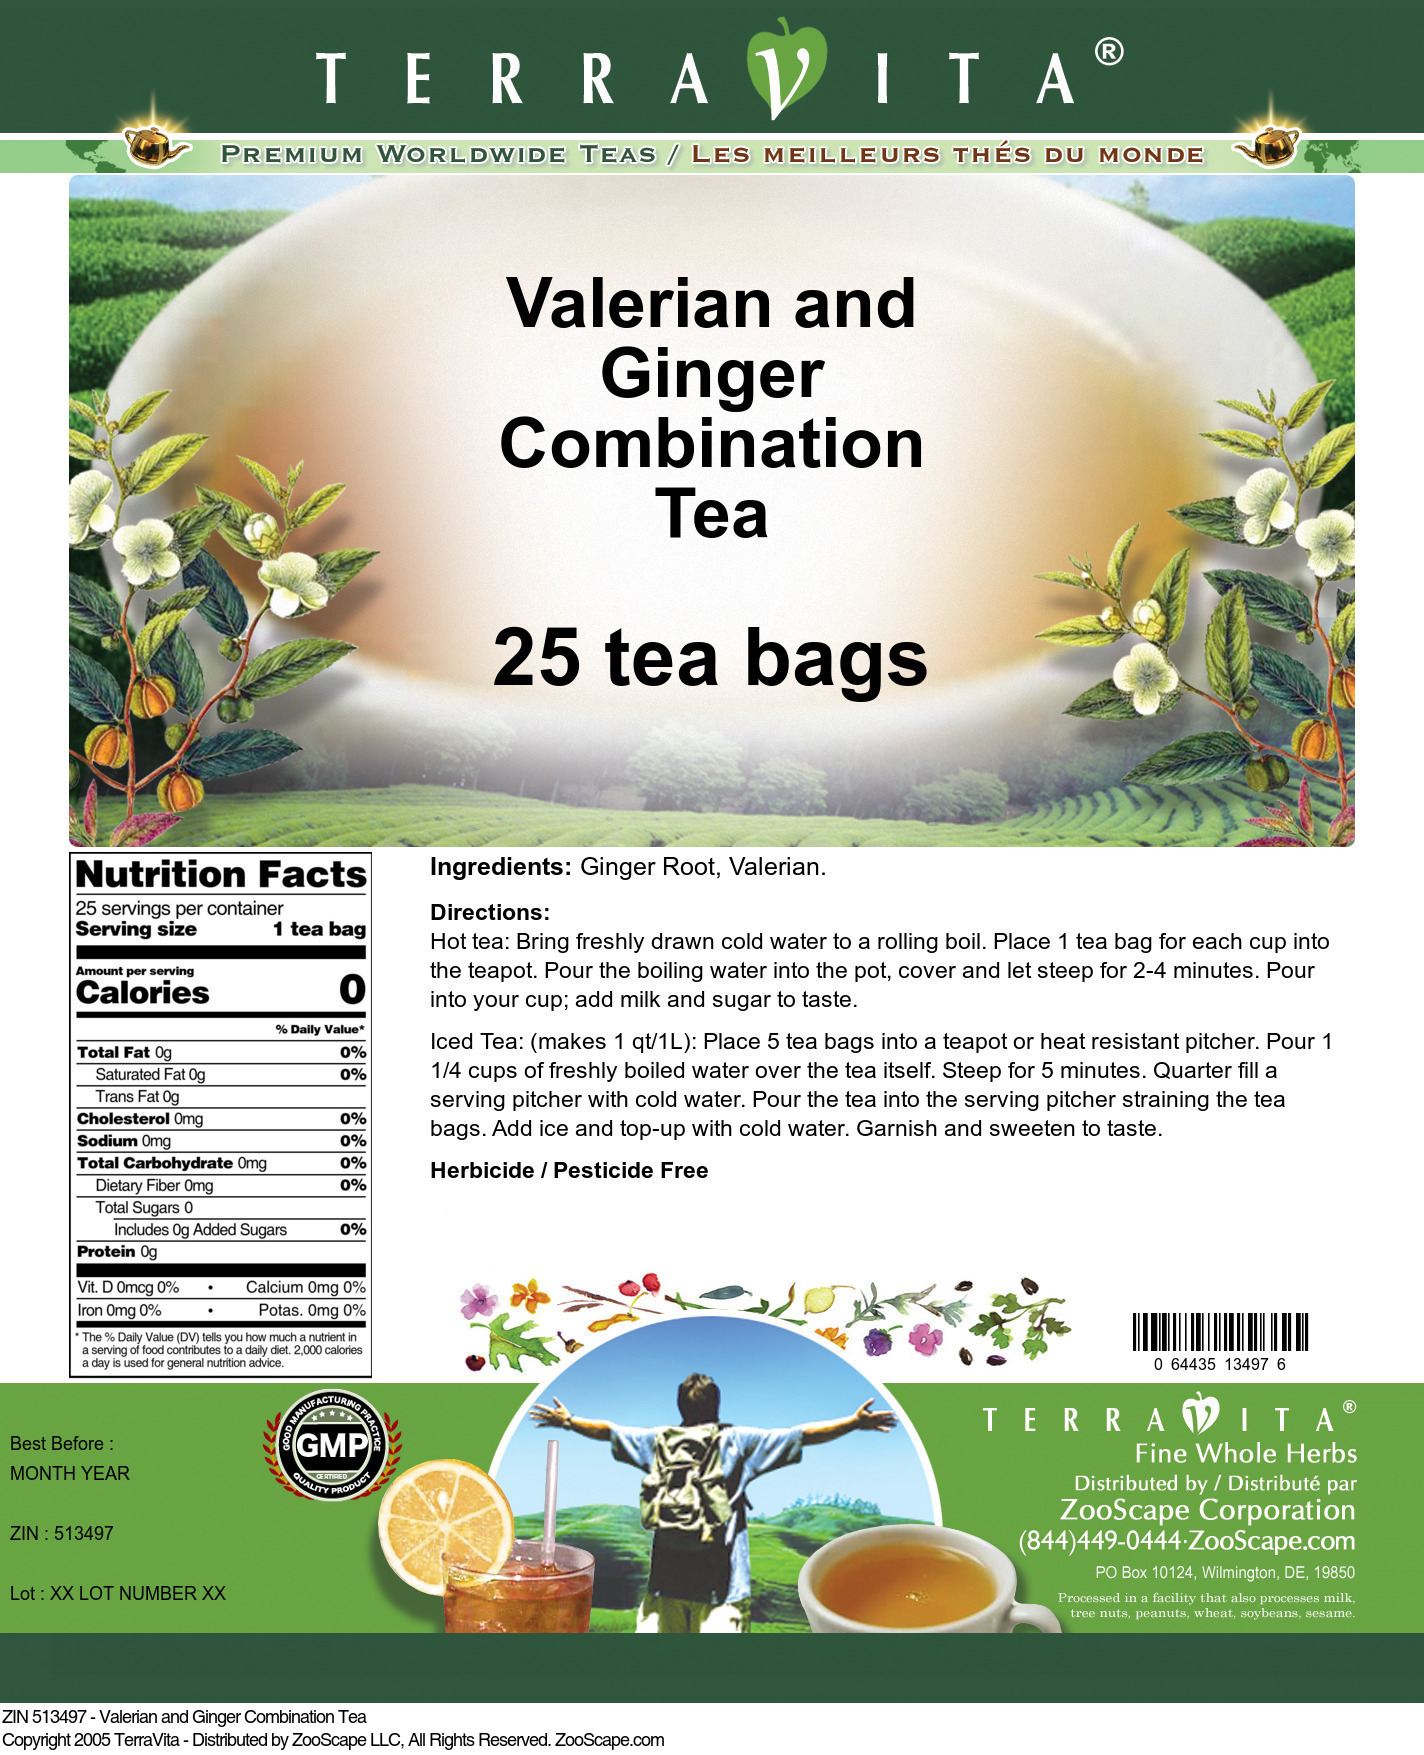 Valerian and Ginger Combination Tea - Label